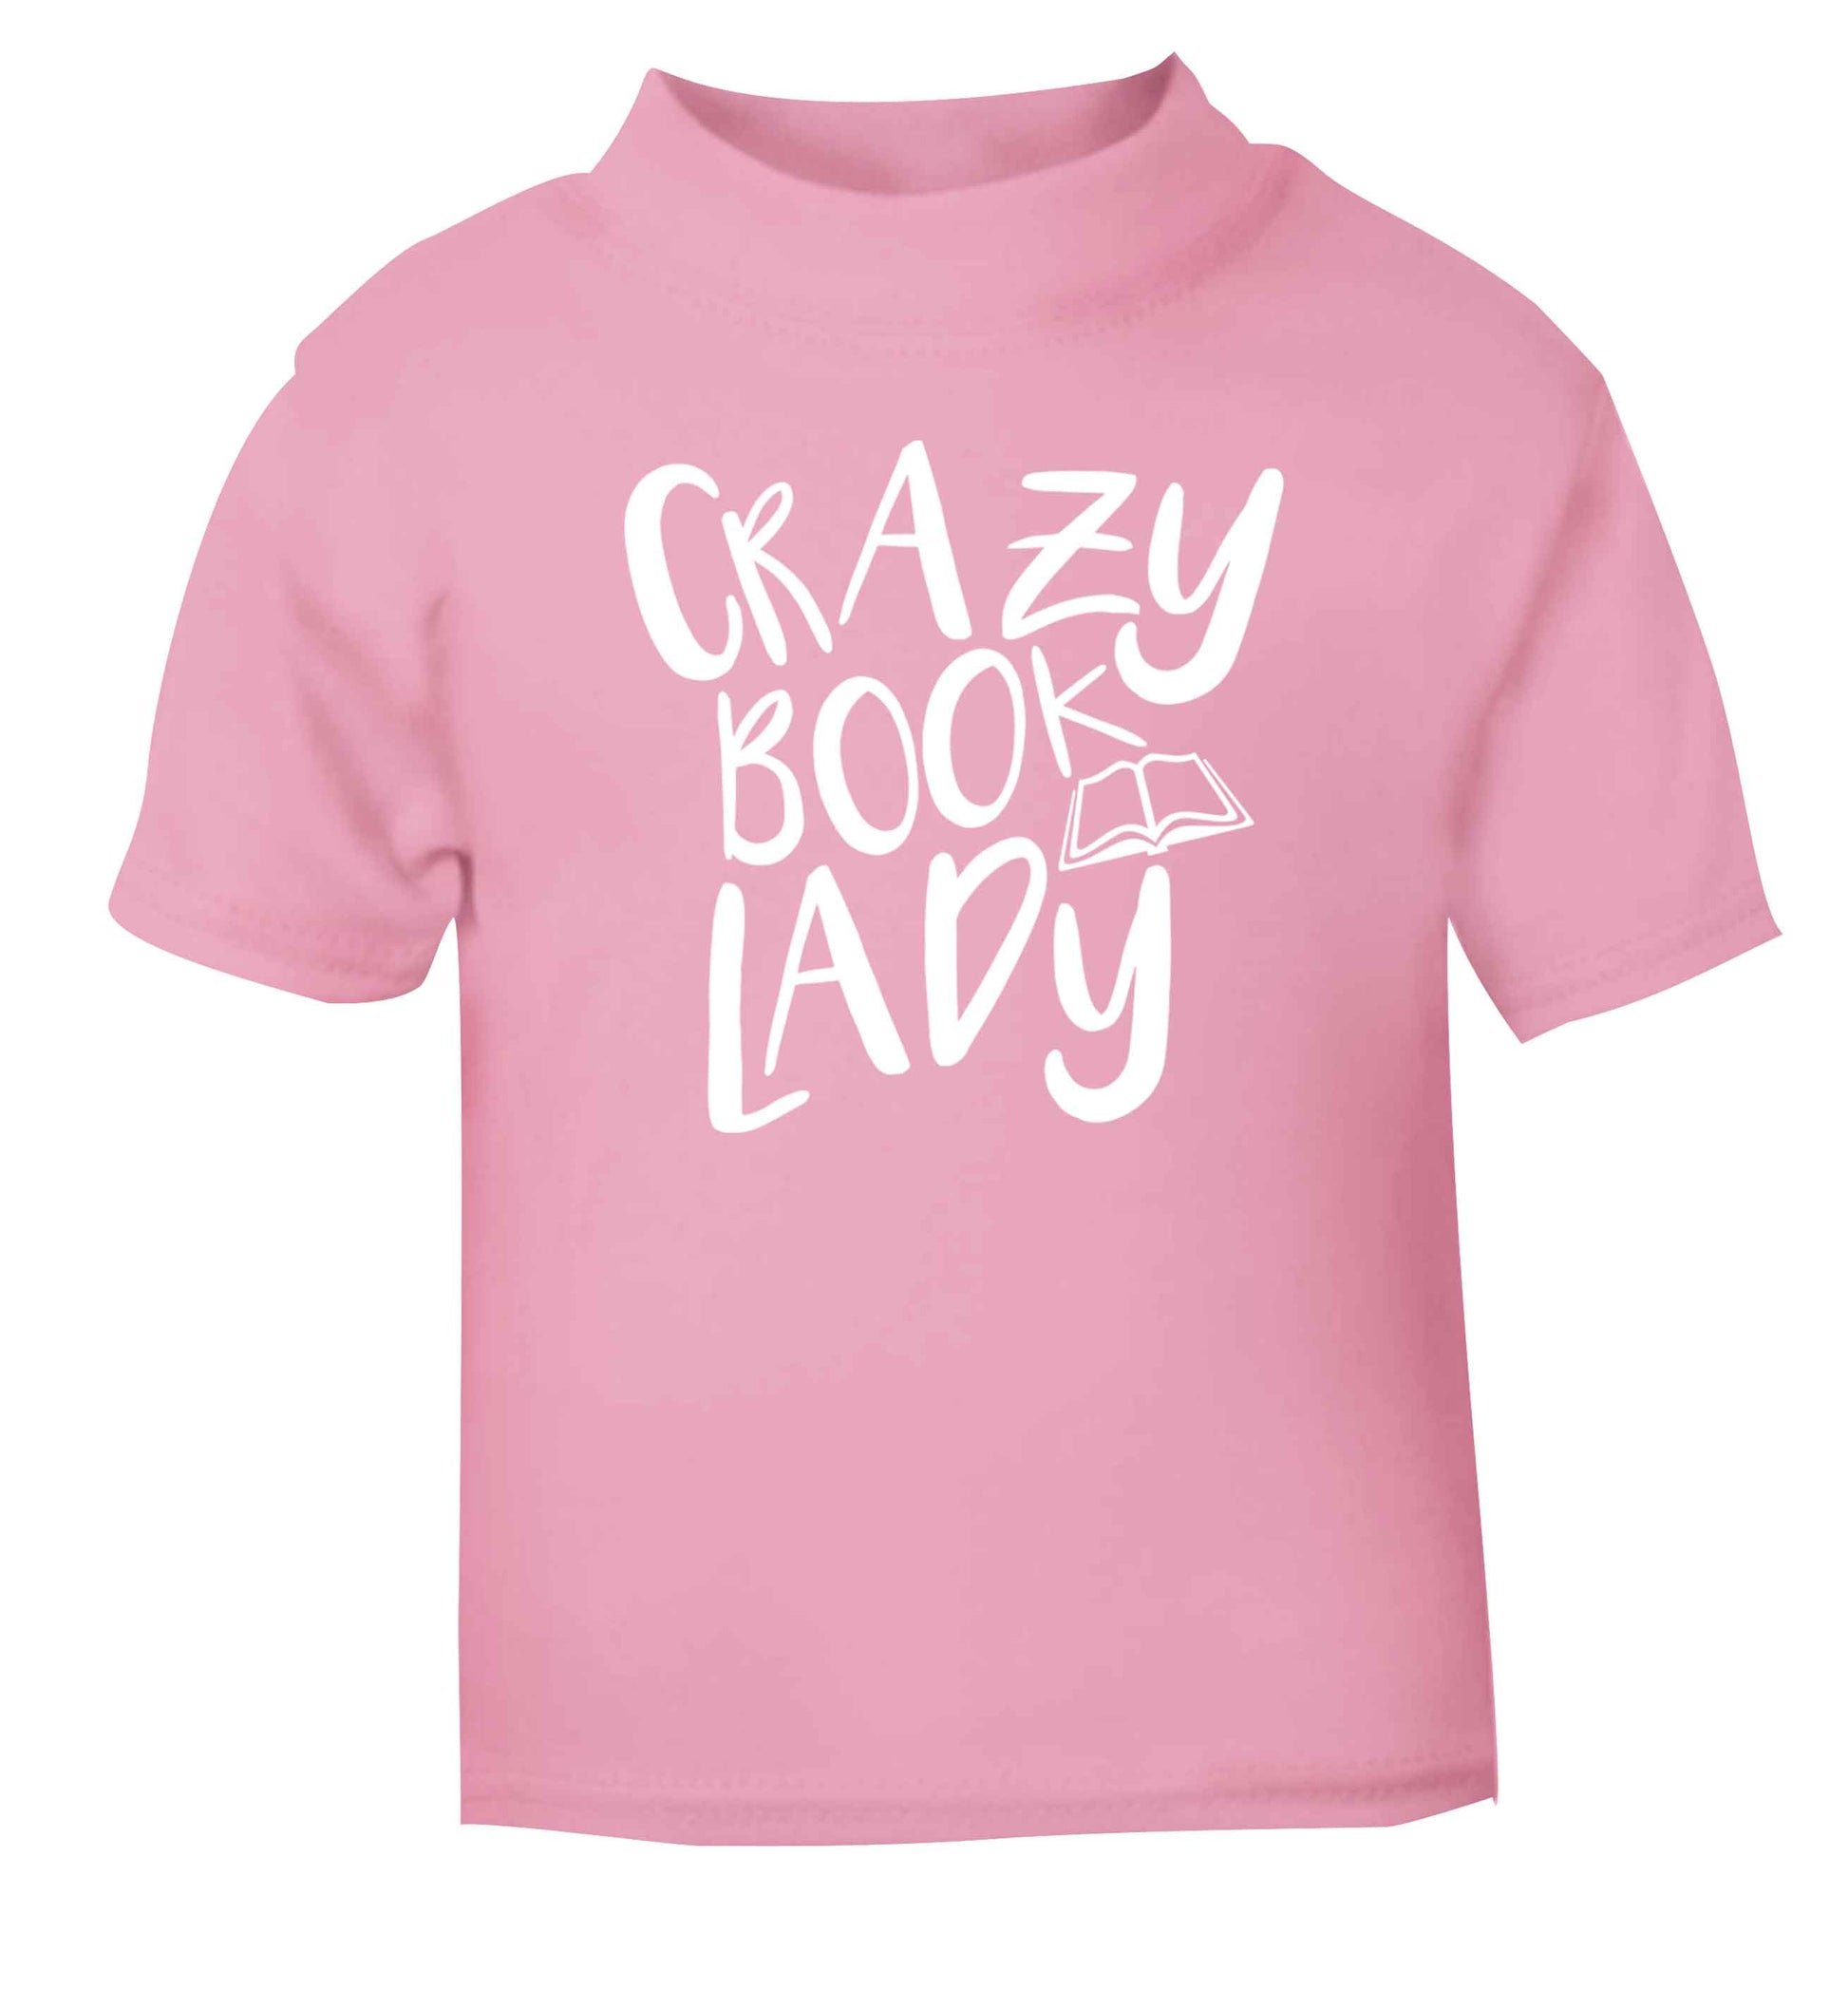 Crazy book lady light pink Baby Toddler Tshirt 2 Years